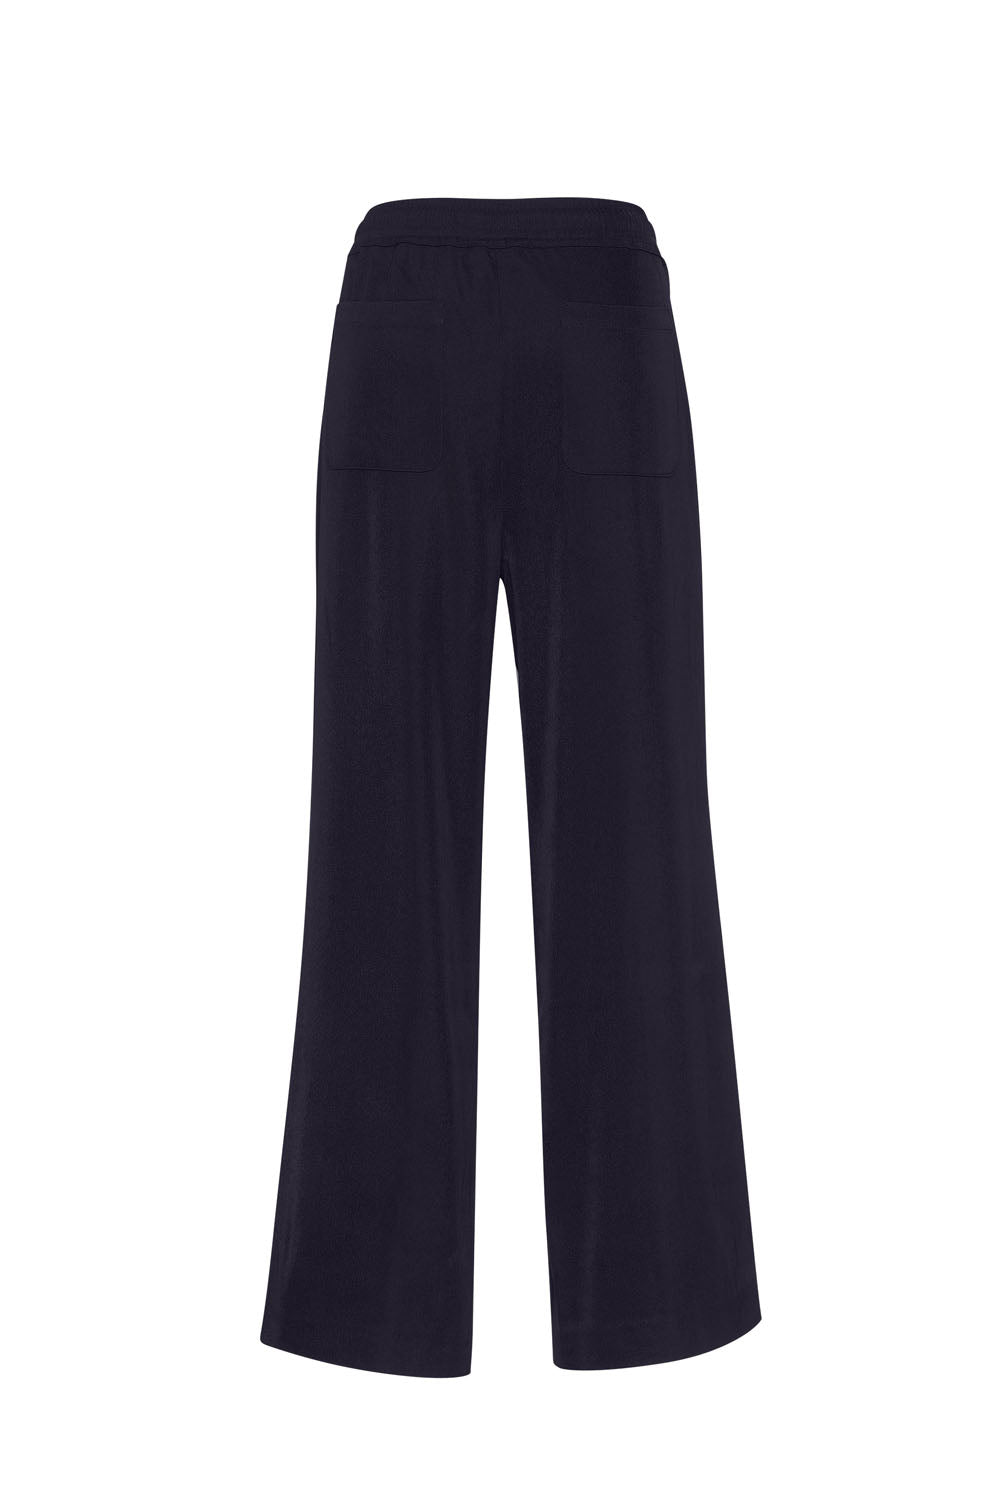 Madly Sweetly Operator Pant - Navy